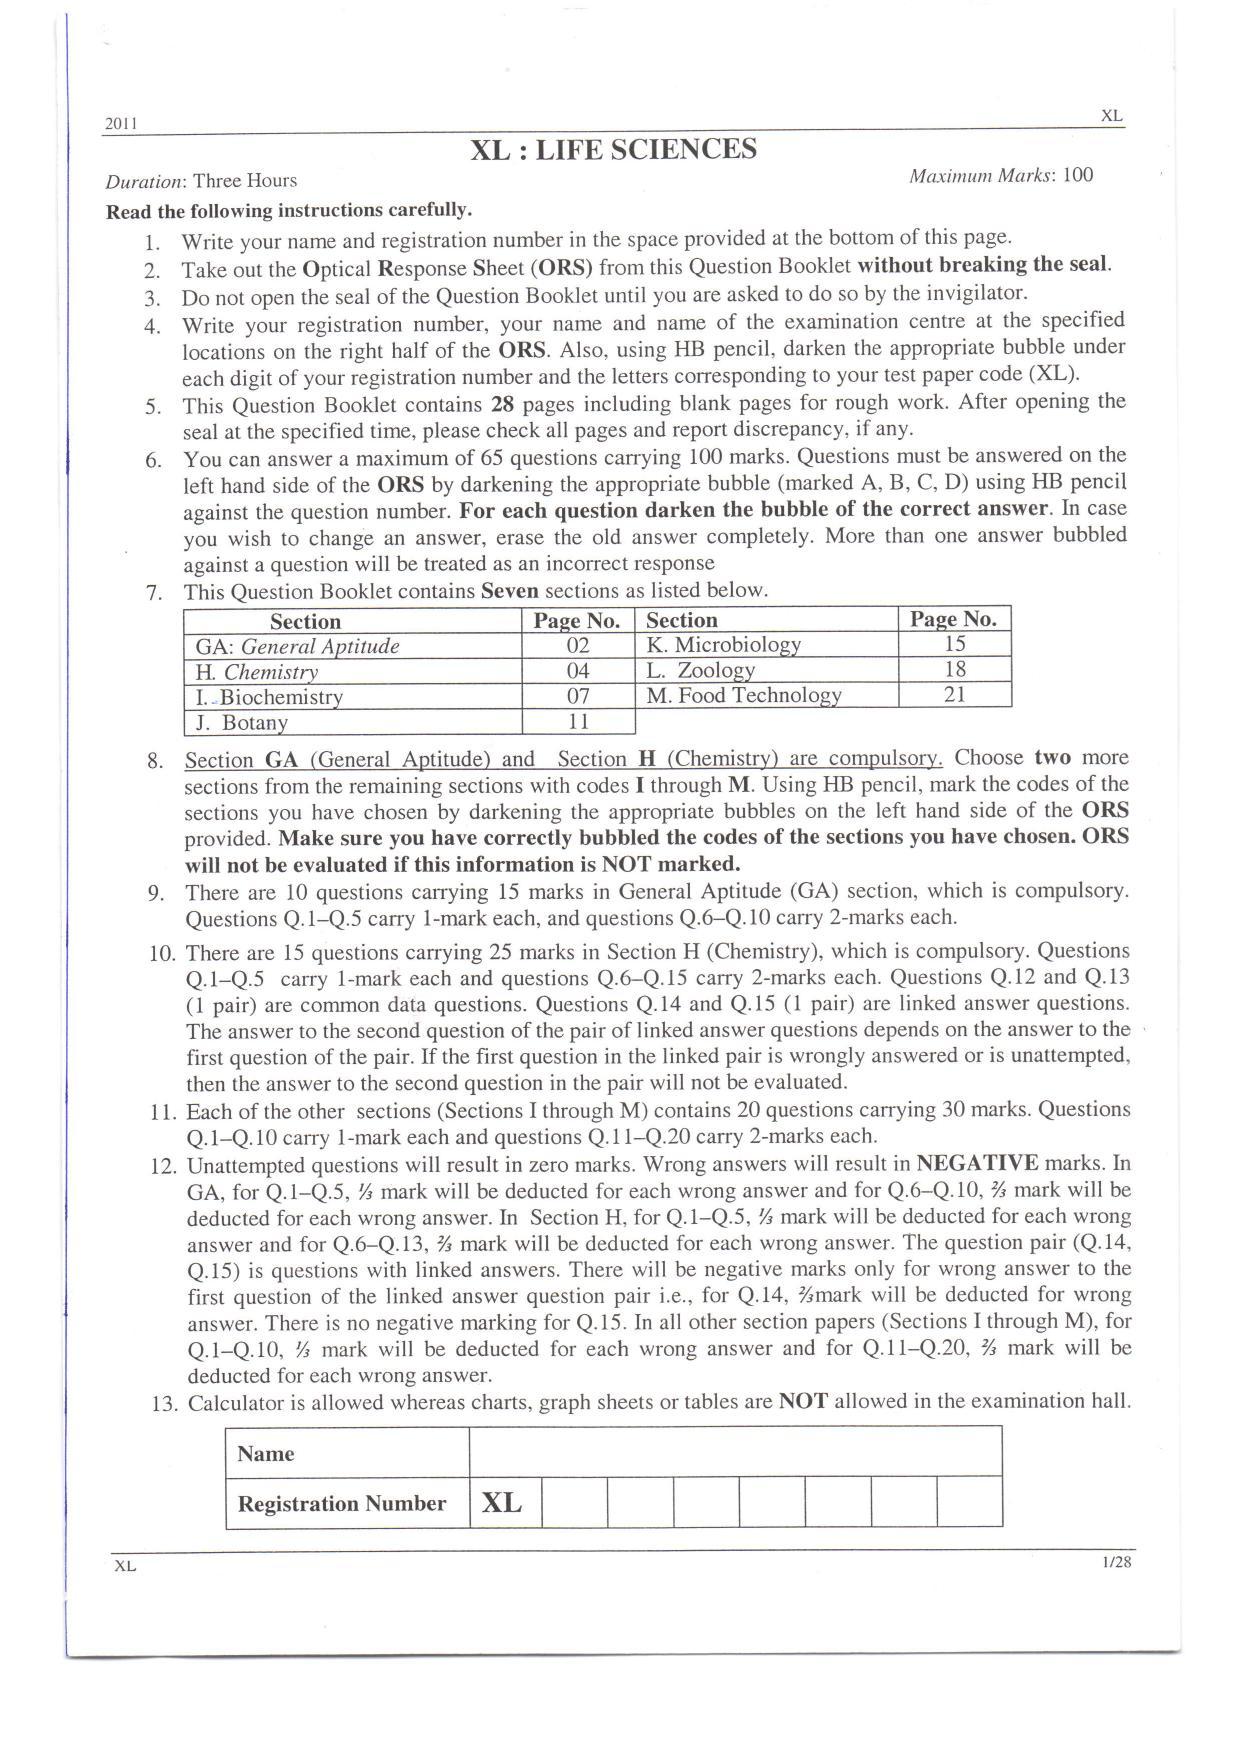 GATE 2011 Life Sciences (XL) Question Paper with Answer Key - Page 1